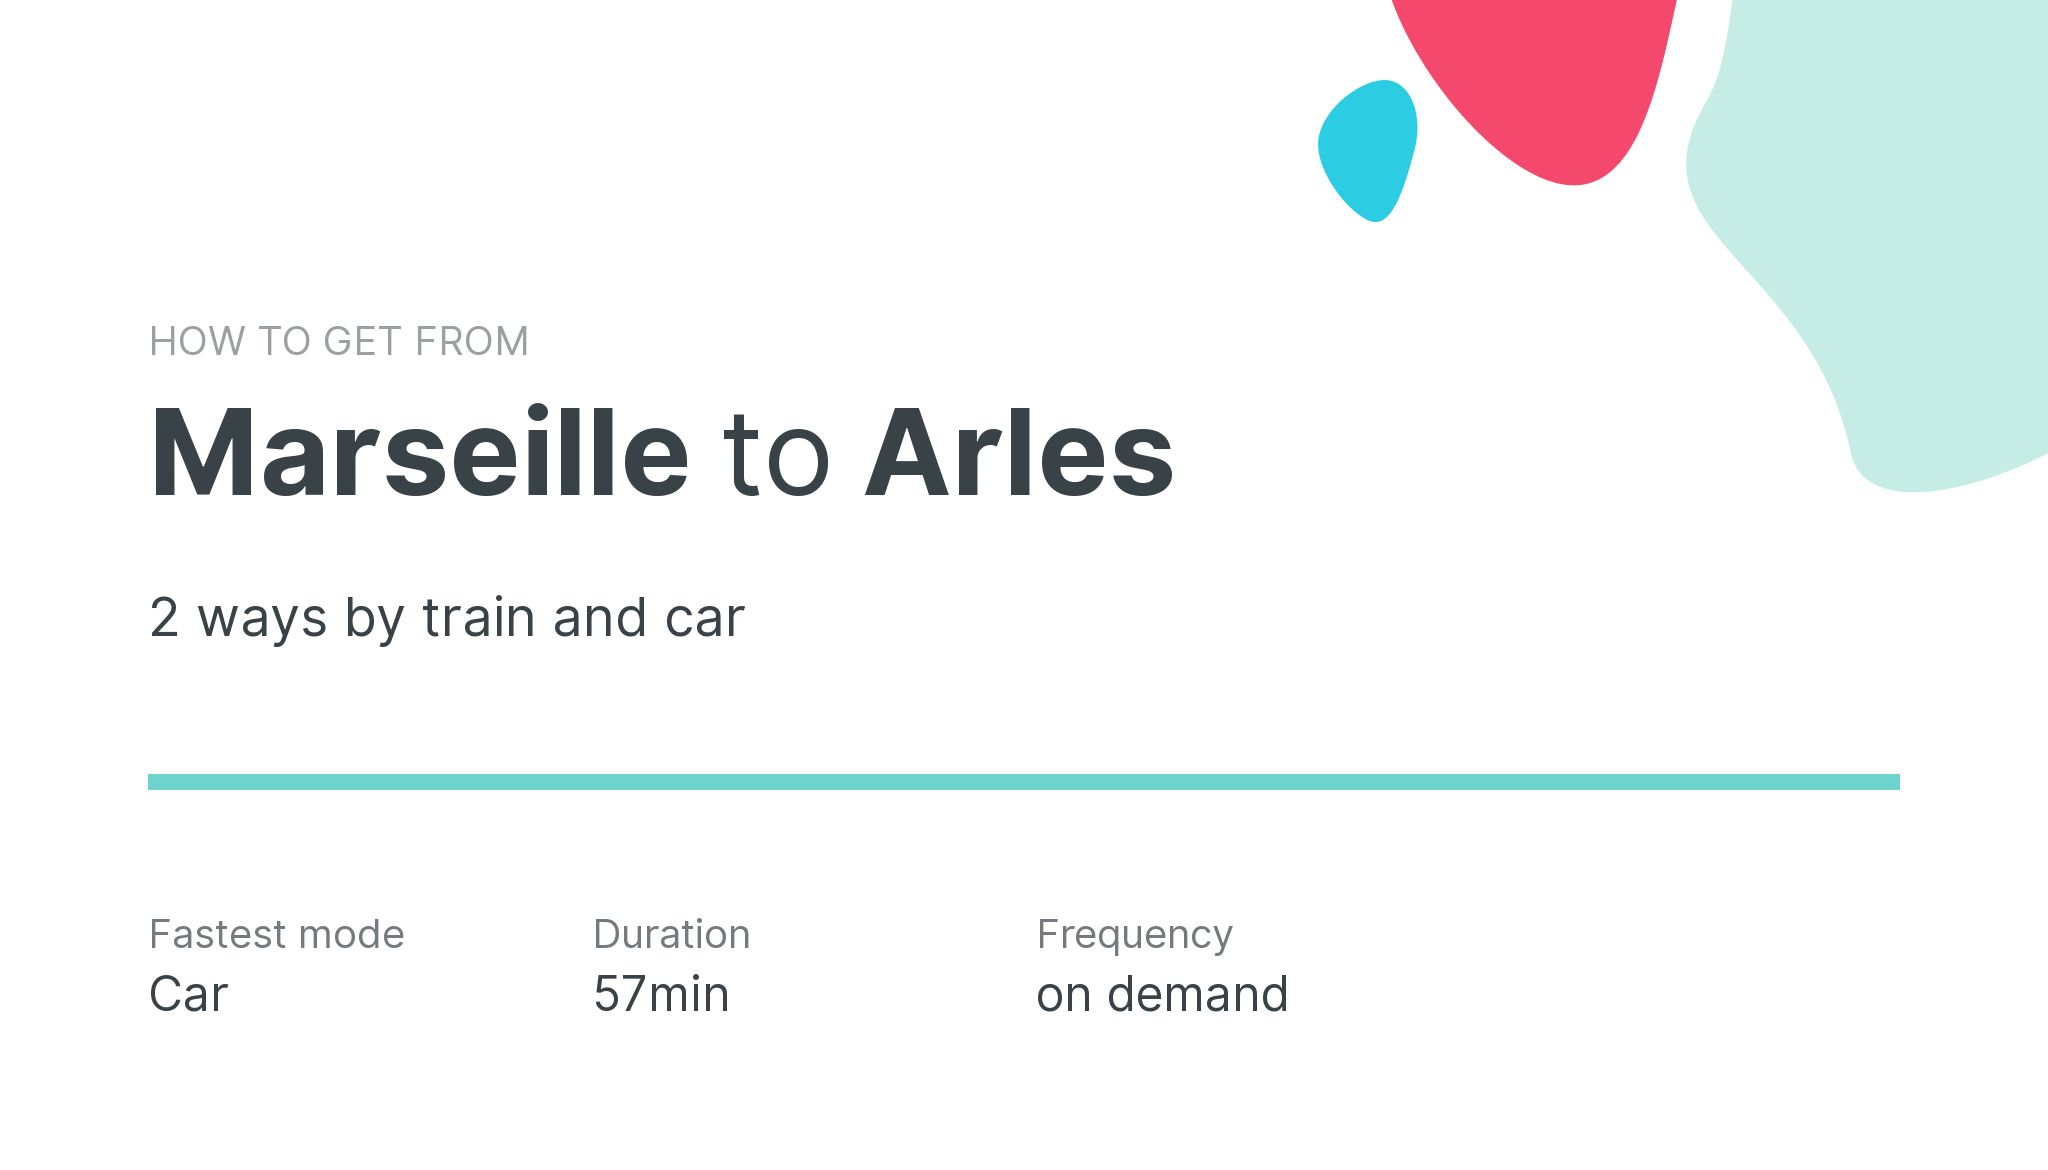 How do I get from Marseille to Arles